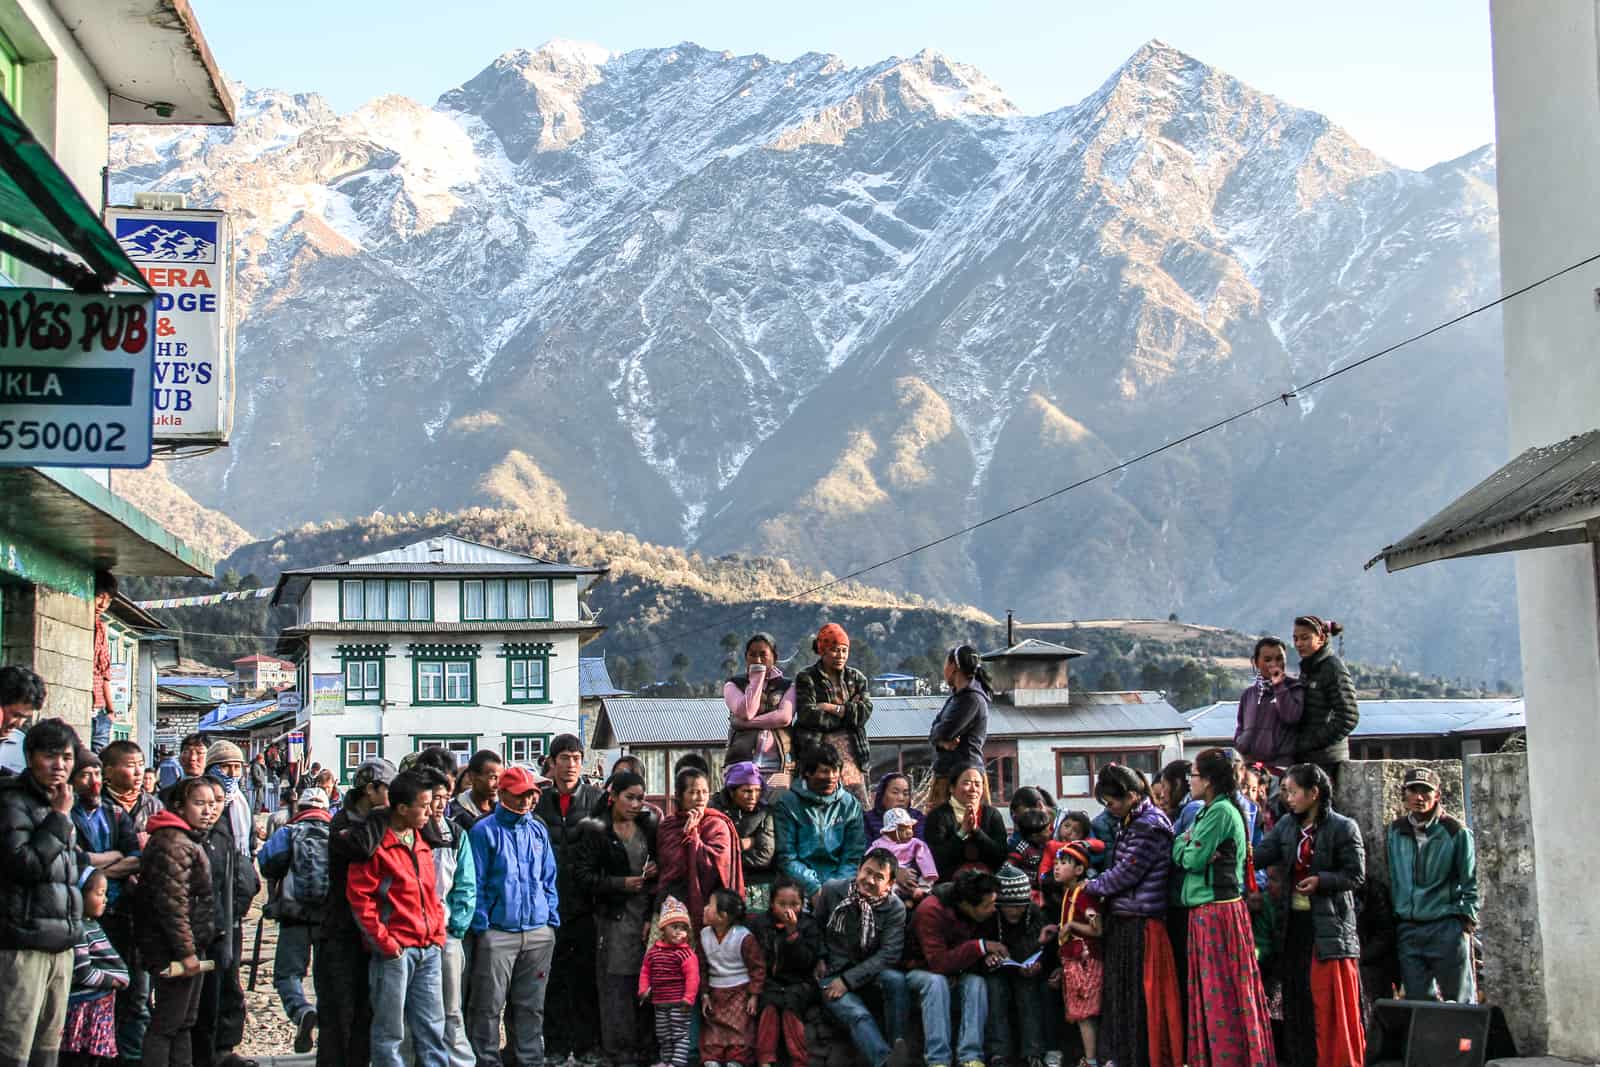 A group of Nepalese people gather in an open square in the town of Luka, based by high mountain ranges